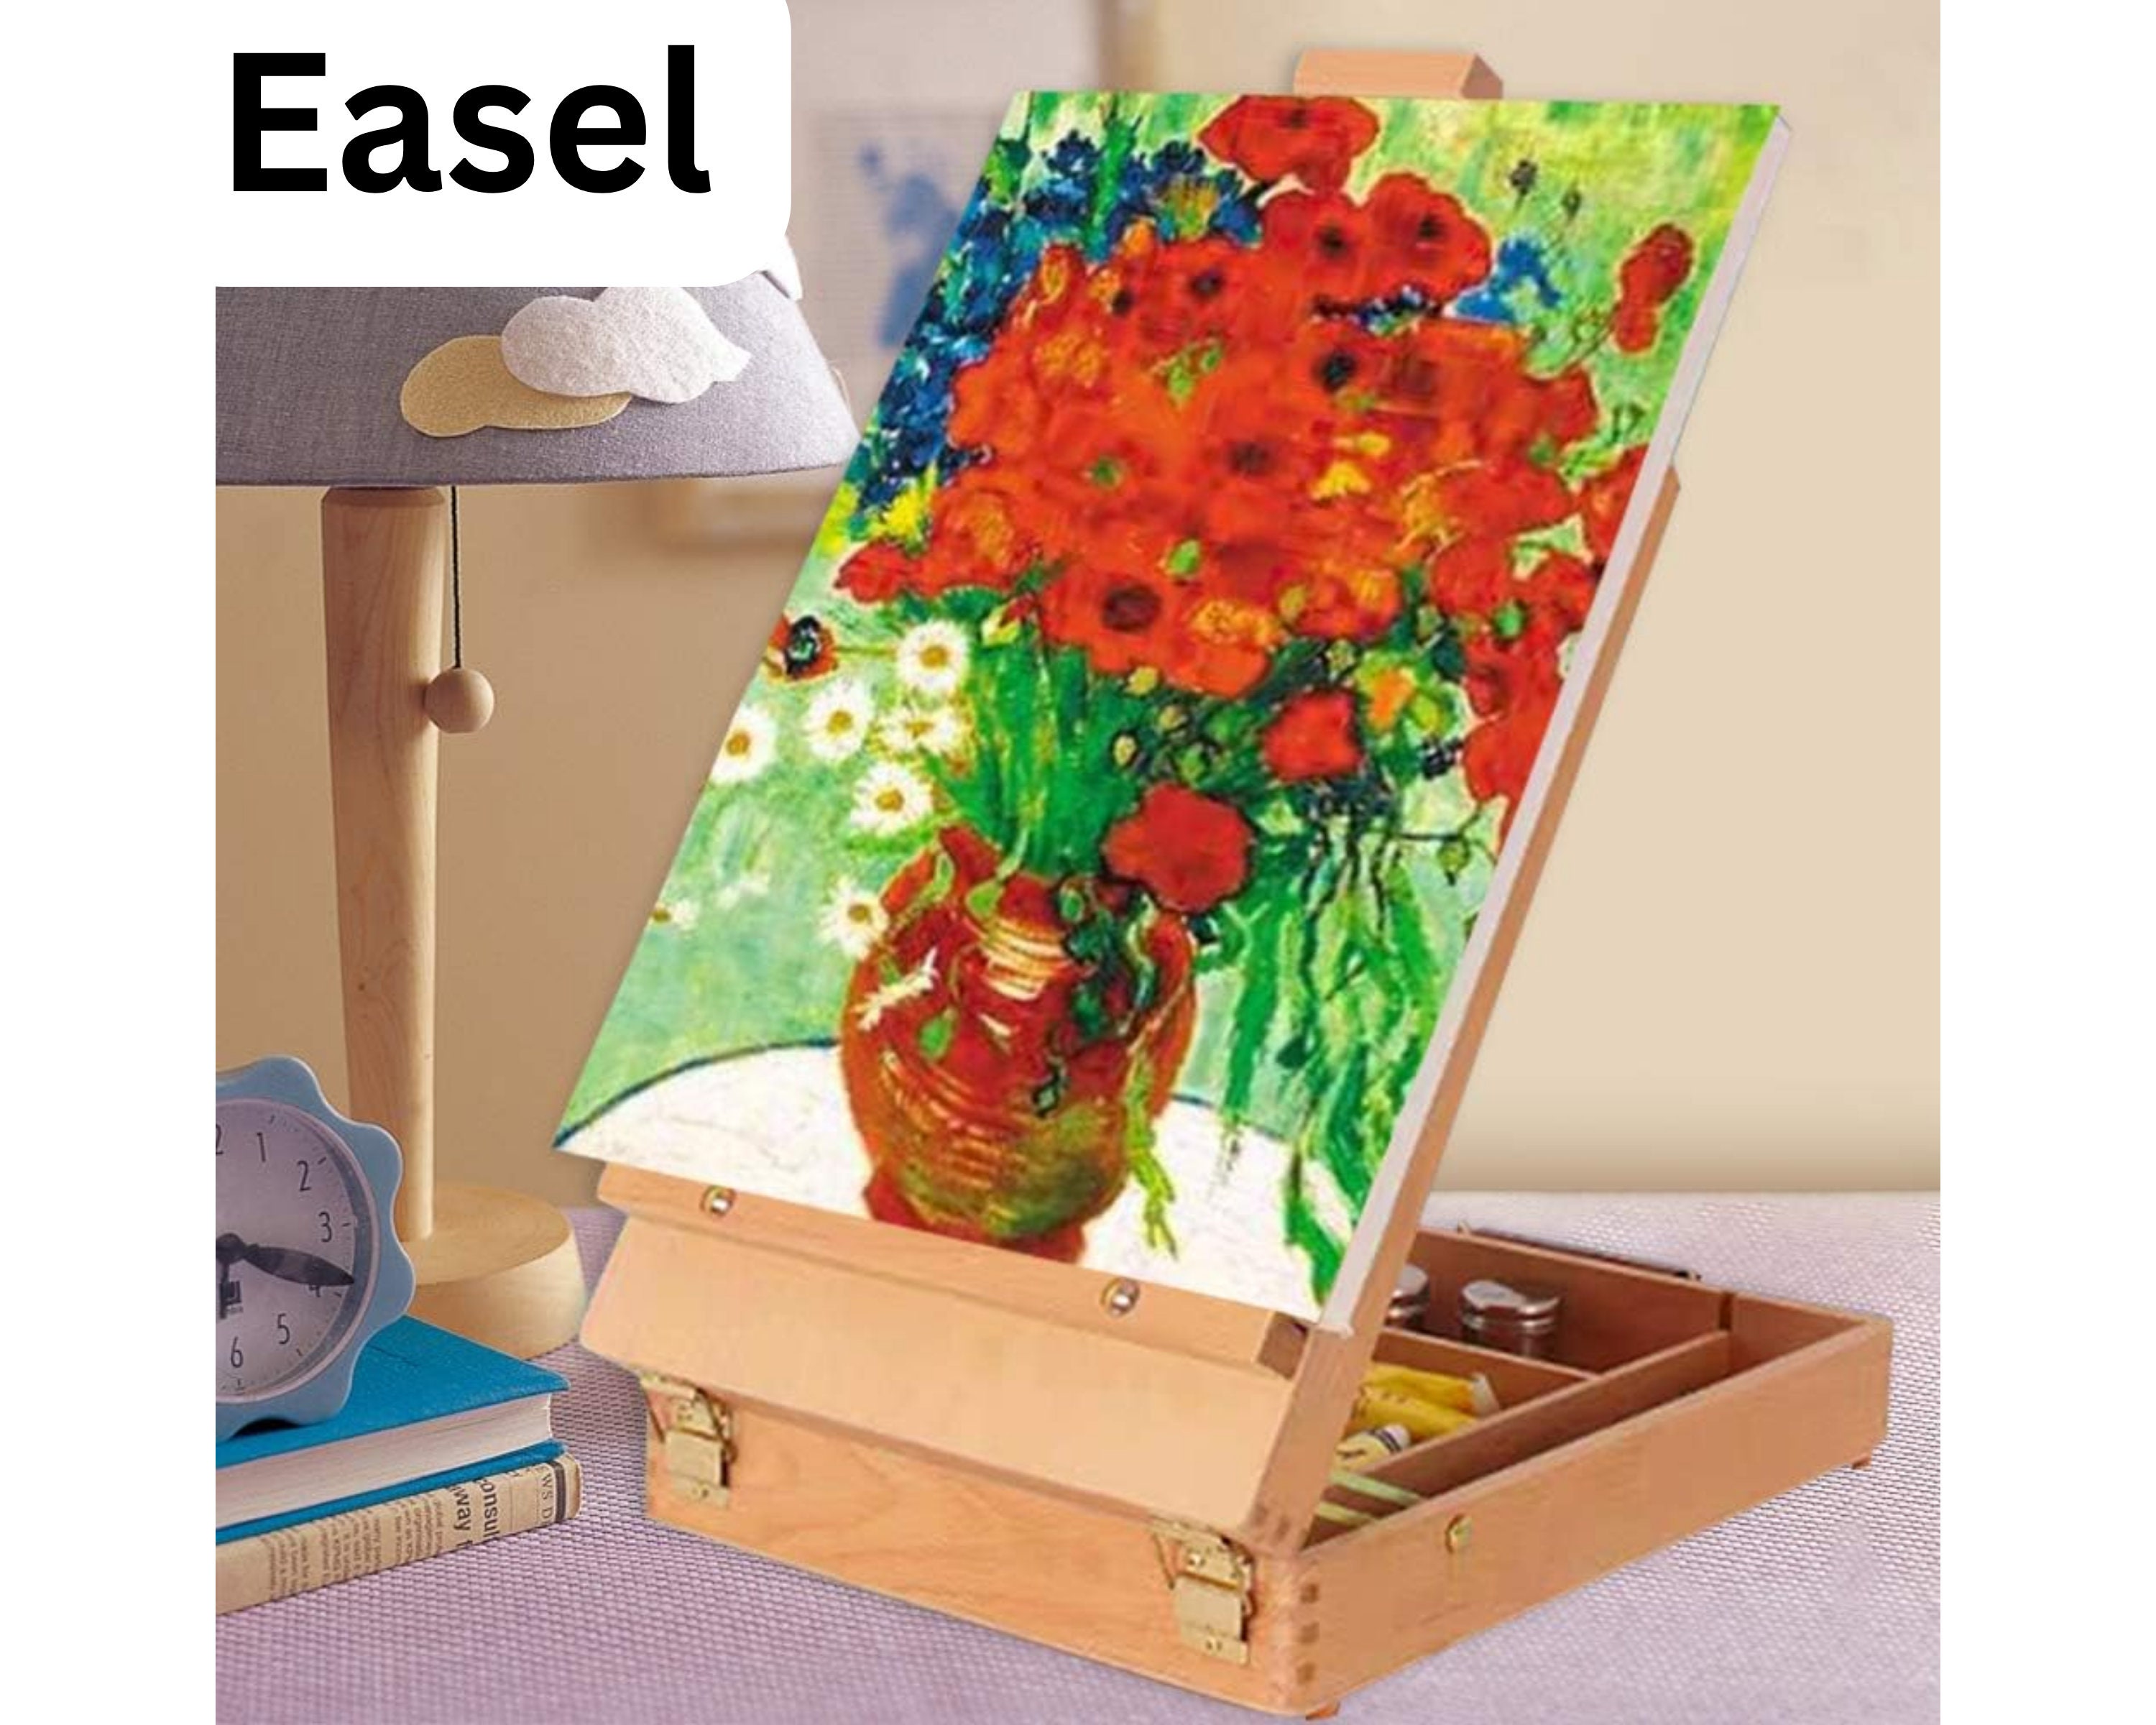 Drawing Board, Table Easel, Tabletop Easel A3 Wood Desktop Painting,  Drawing Table, Sketching Board & Display Easel Table Easel ТМ-37 A3 